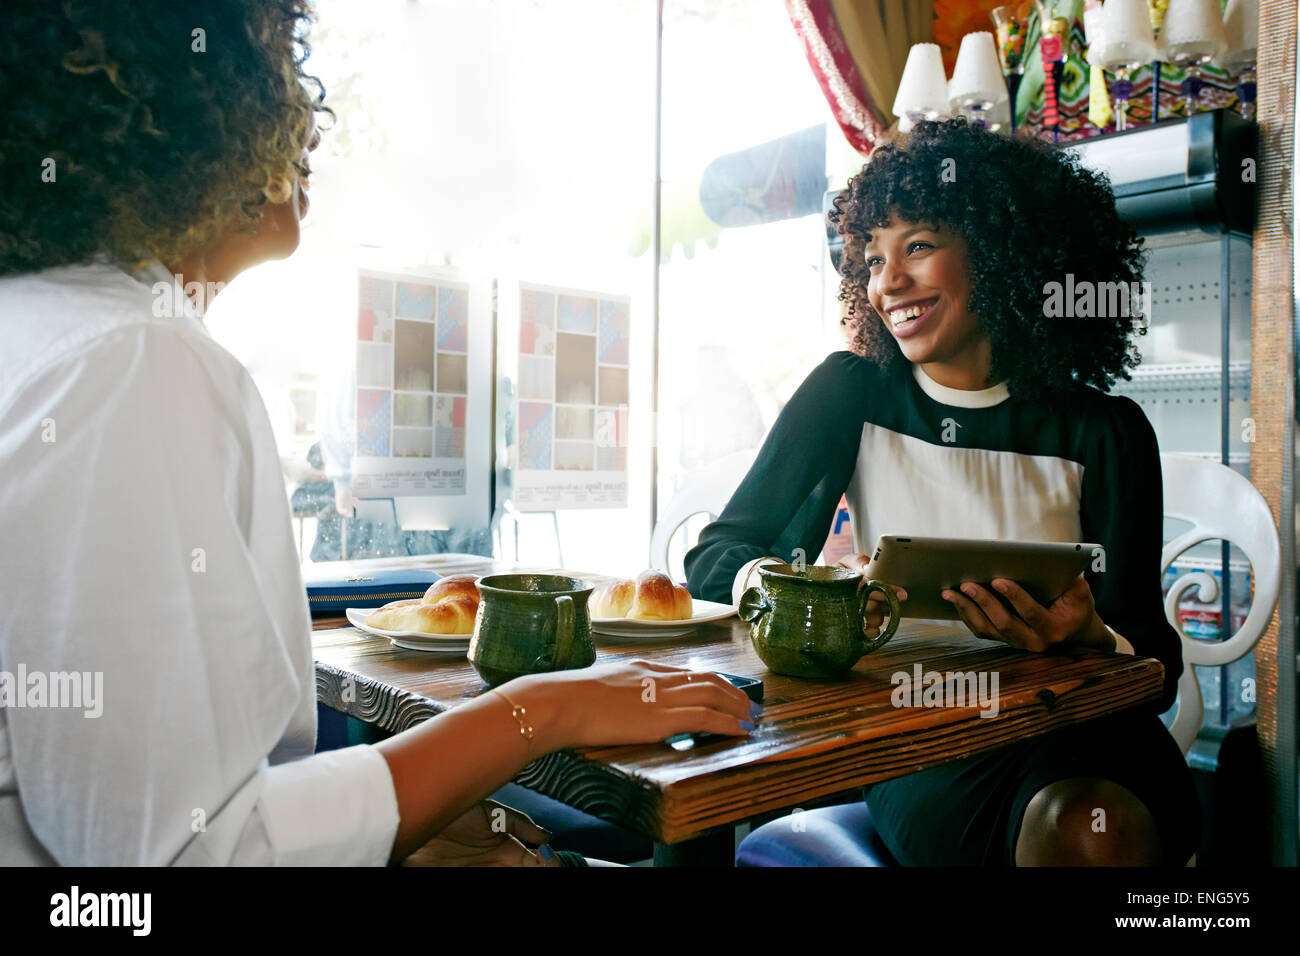 Women using digital tablet and drinking coffee in cafe Stock Photo